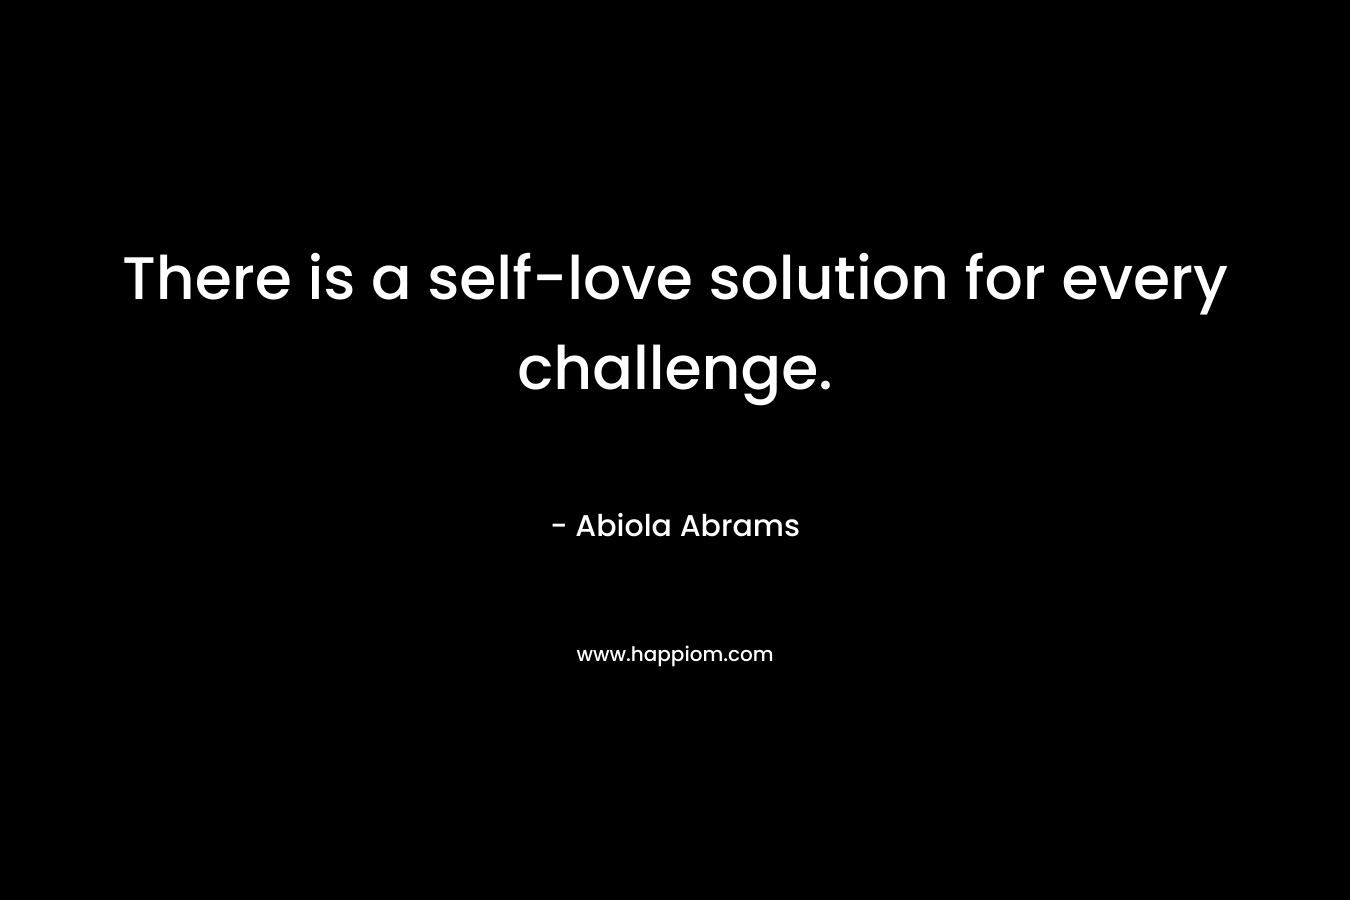 There is a self-love solution for every challenge. – Abiola Abrams